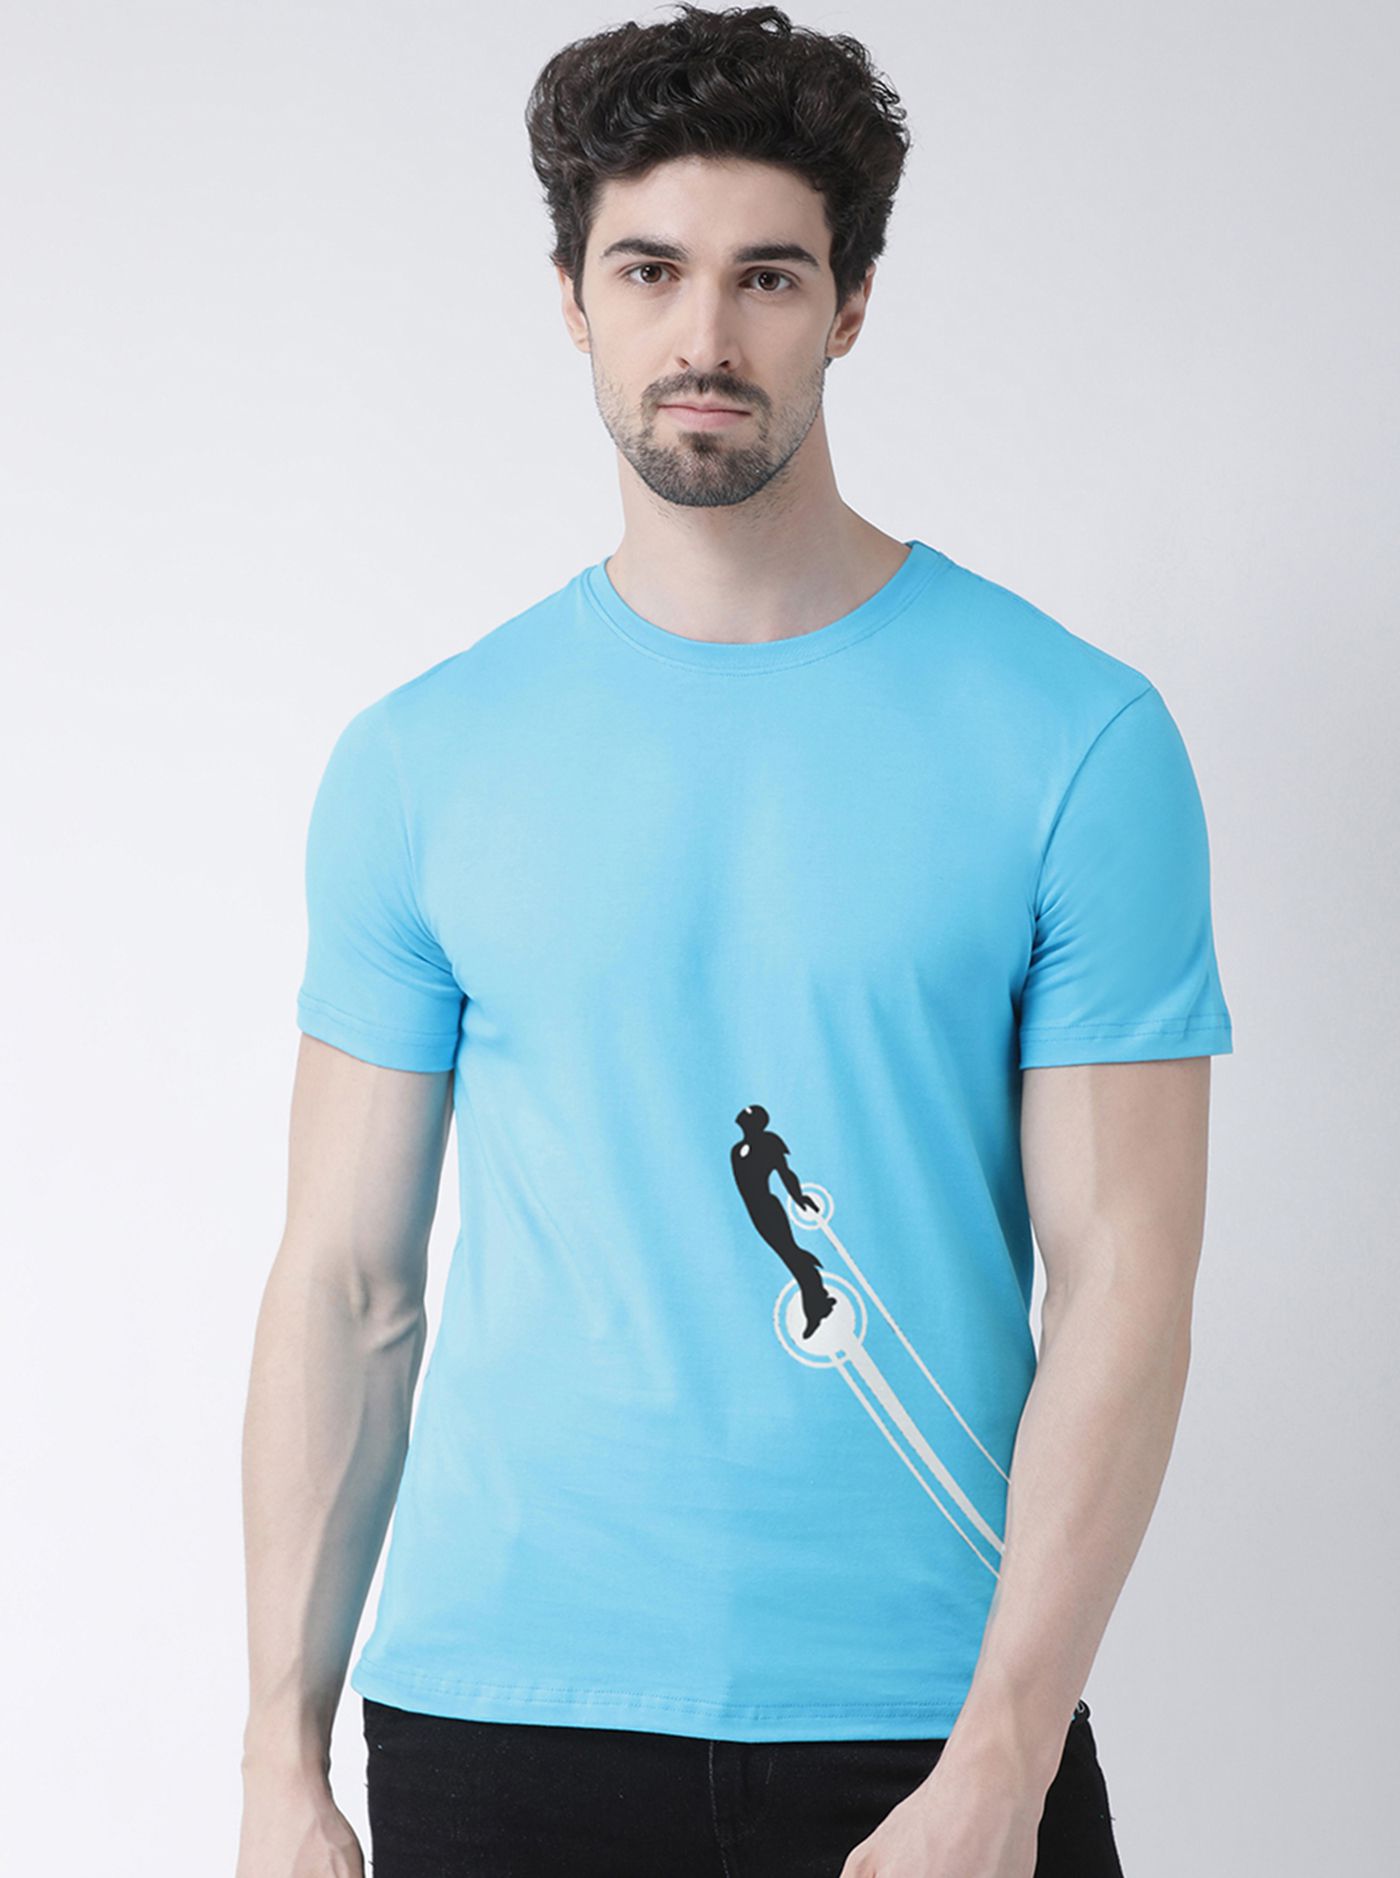     			Friskers 100% Cotton Slim Fit Printed Half Sleeves Men's T-Shirt - Turquoise ( Pack of 1 )